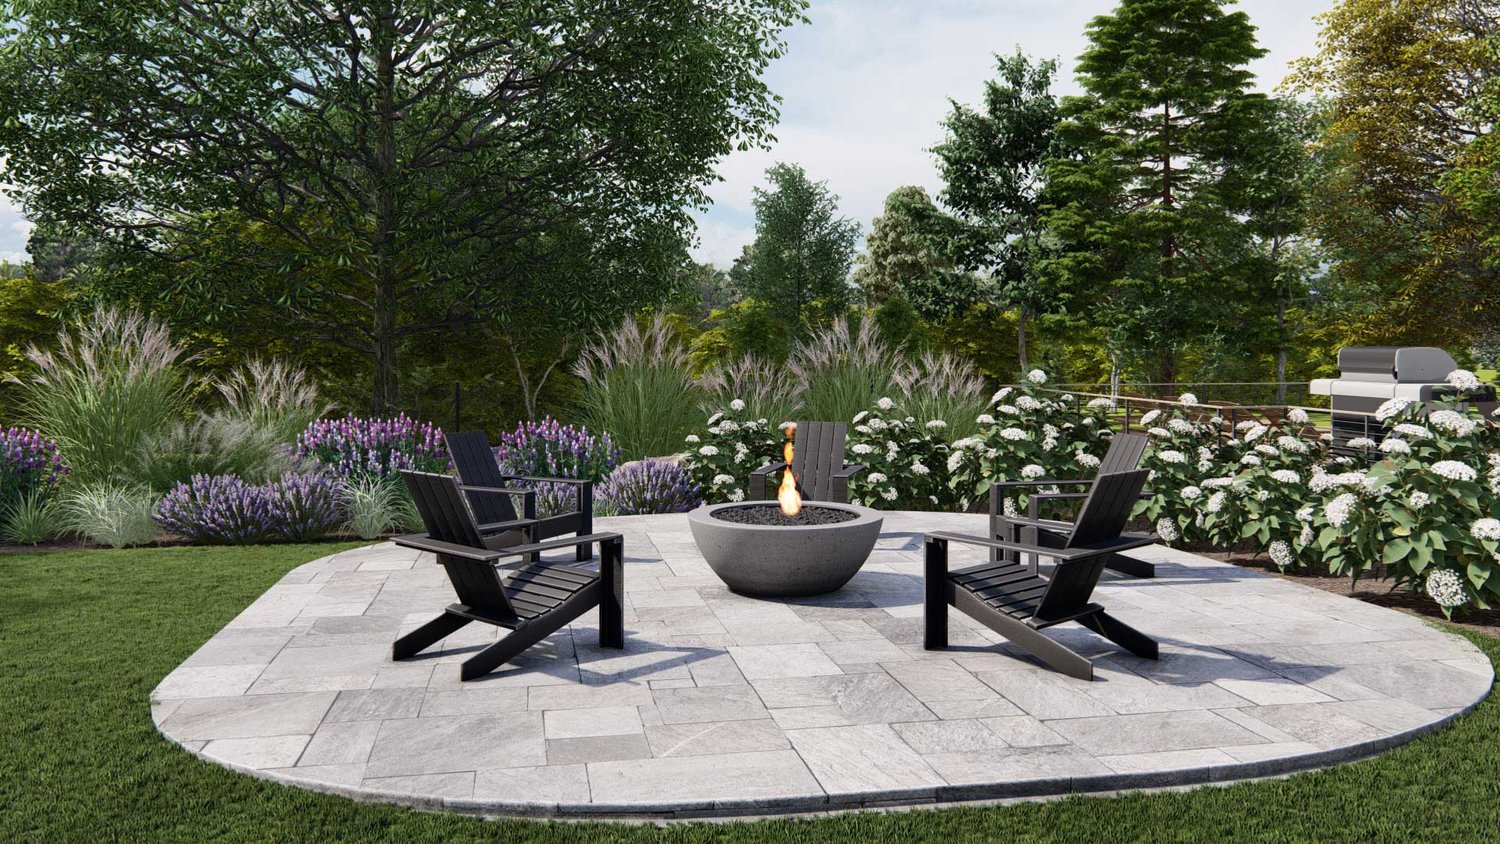 Long Island backyard garden with outdoor kitchen and concrete paver patio fire pit seating area with adirondack chairs